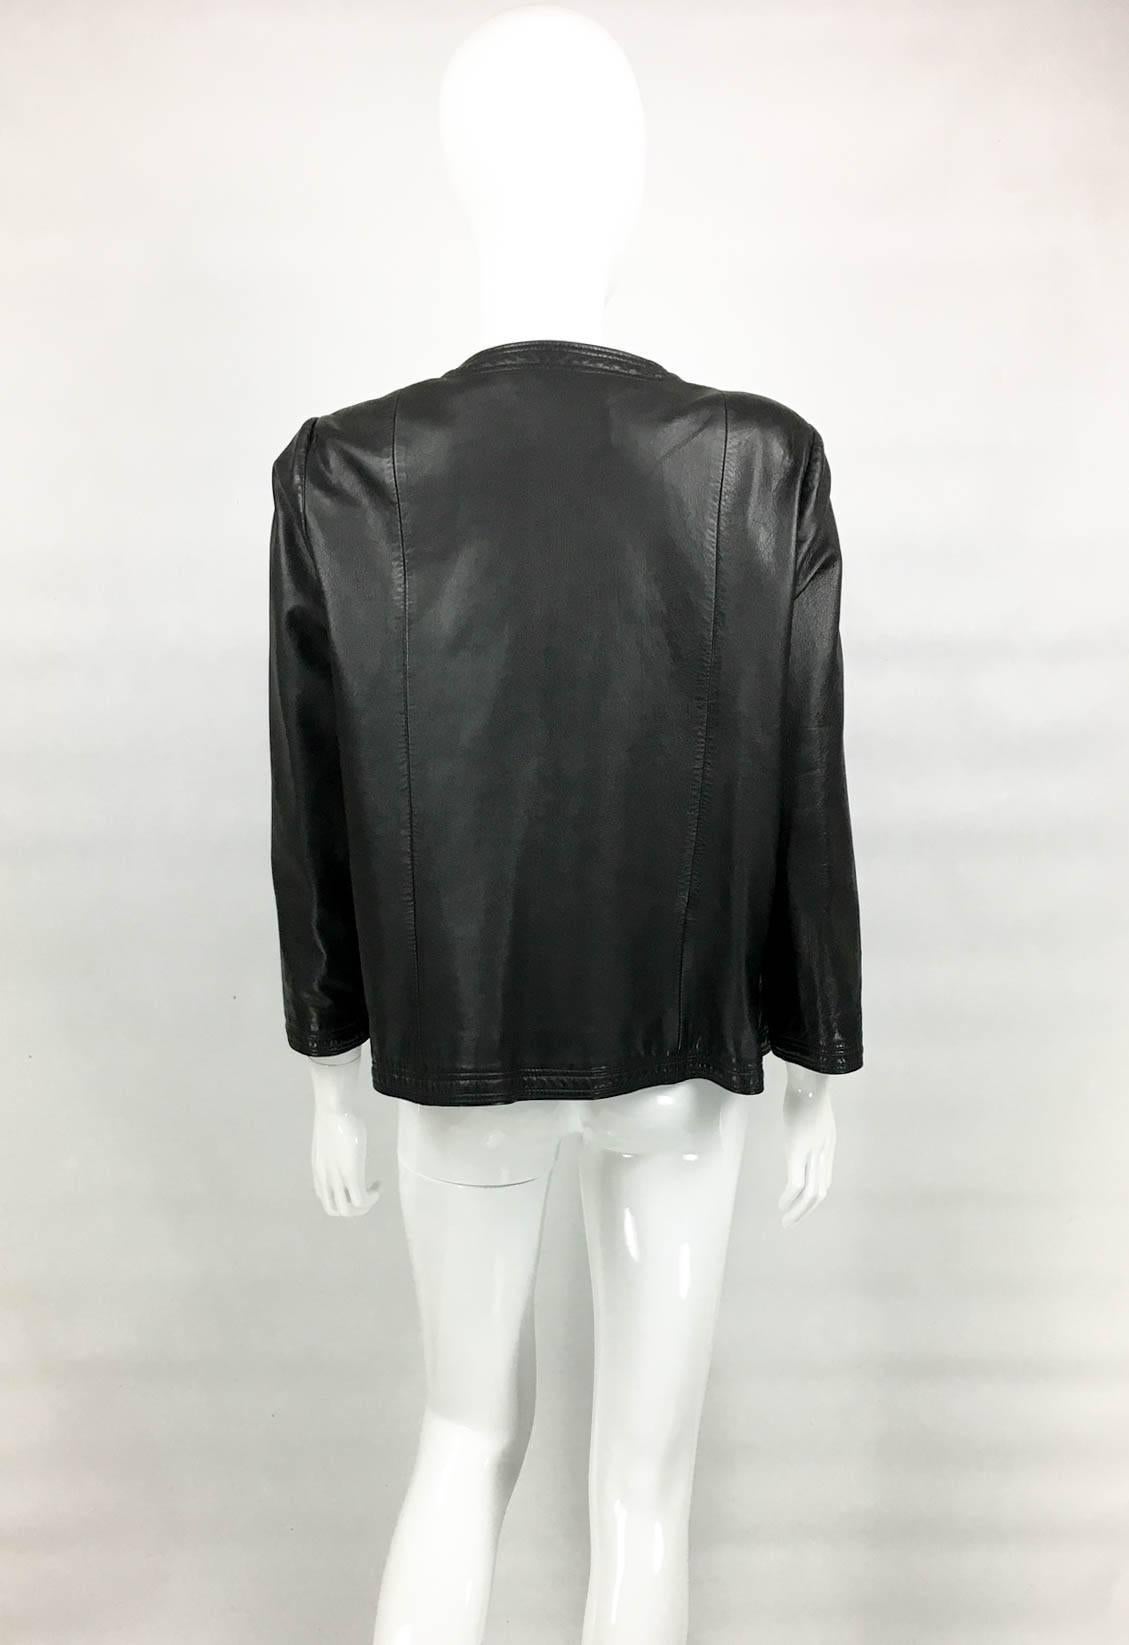 Chanel Black Leather Jacket With Gold-Tone Logo Buttons - 1980s 5